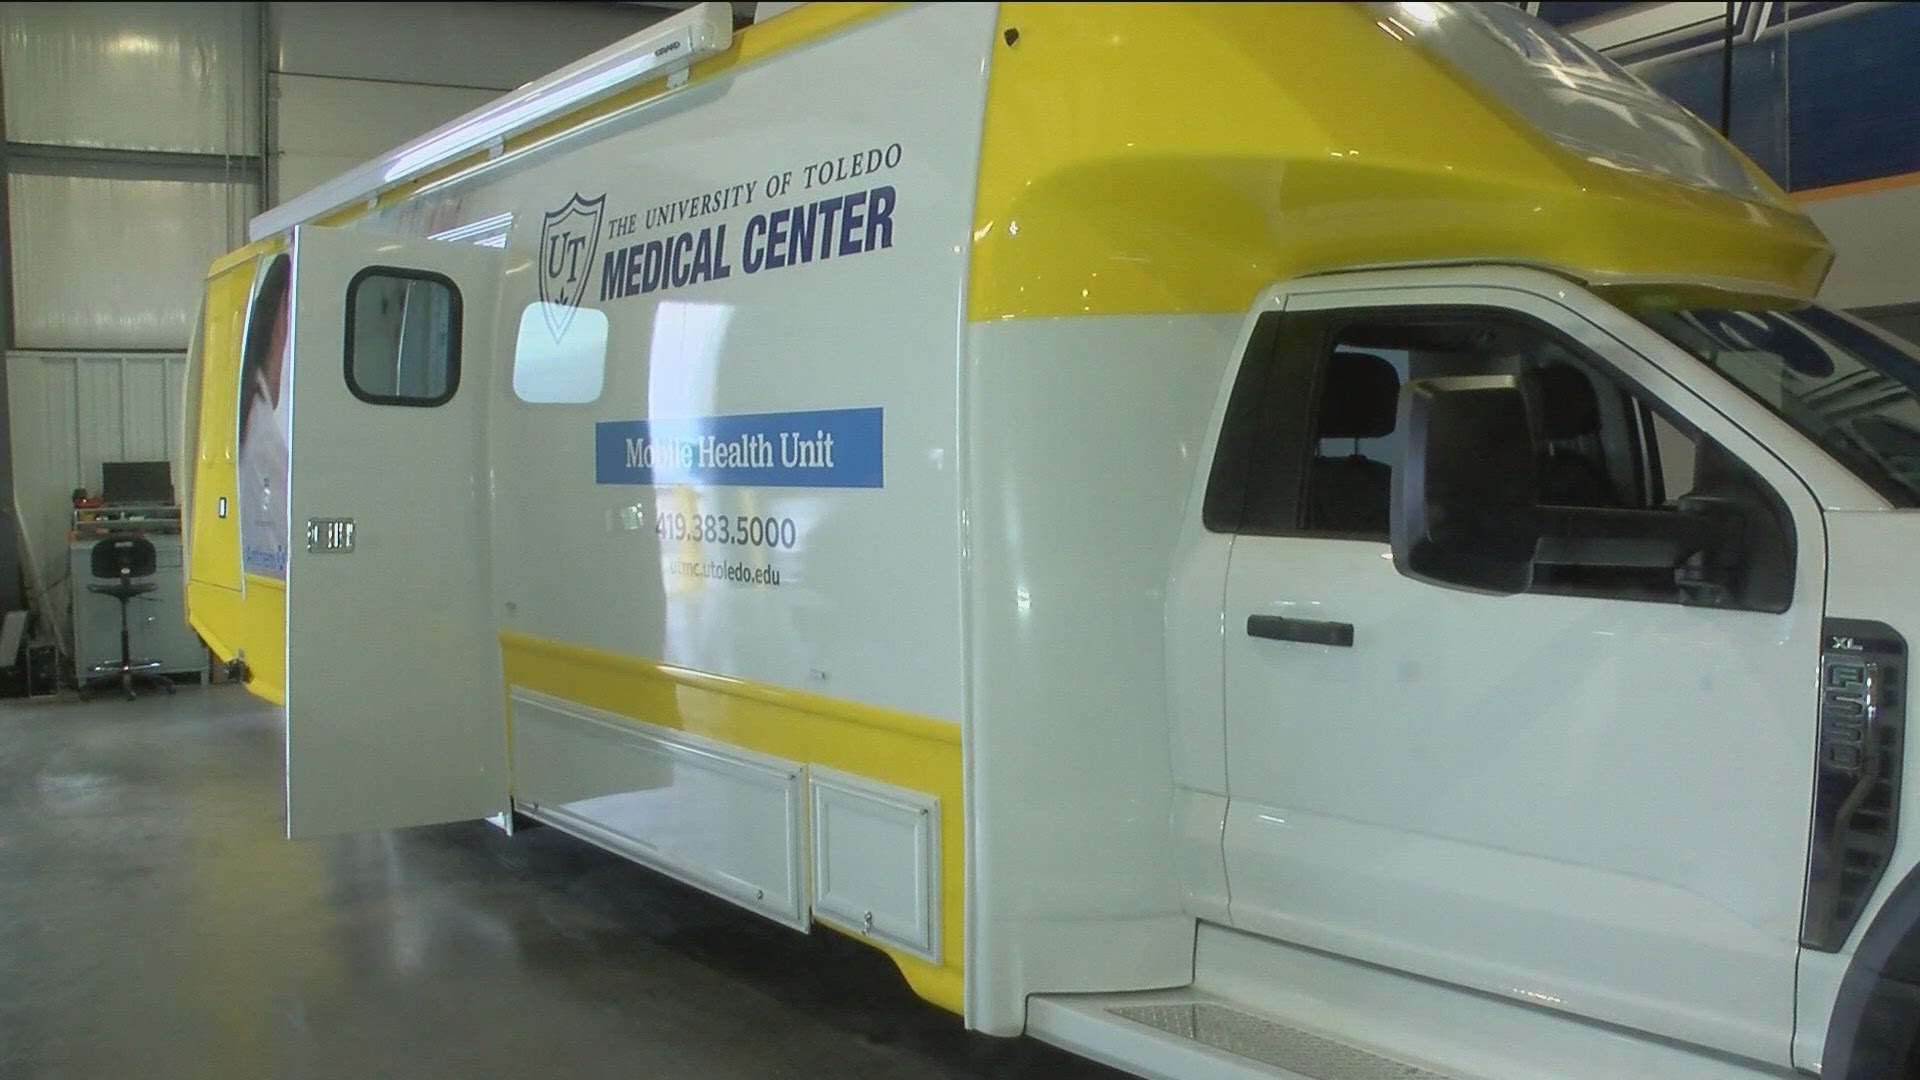 The mobile clinic will operate as a rolling medical office that can provide a variety of healthcare services often in medically under served areas.